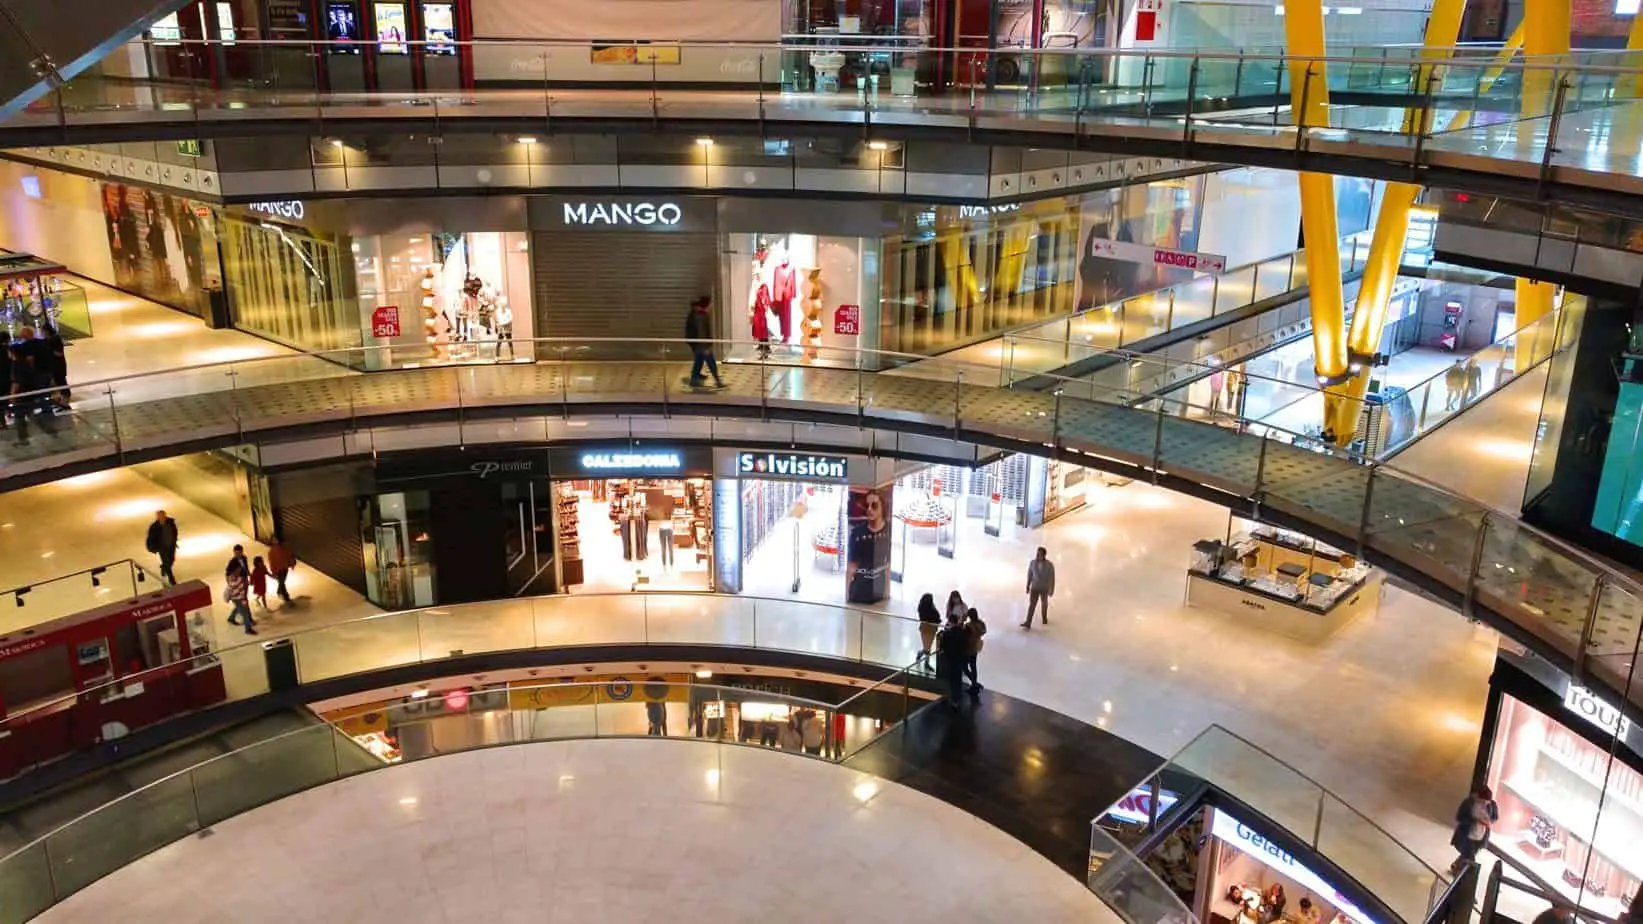 How Digital Signage is Used in Retail